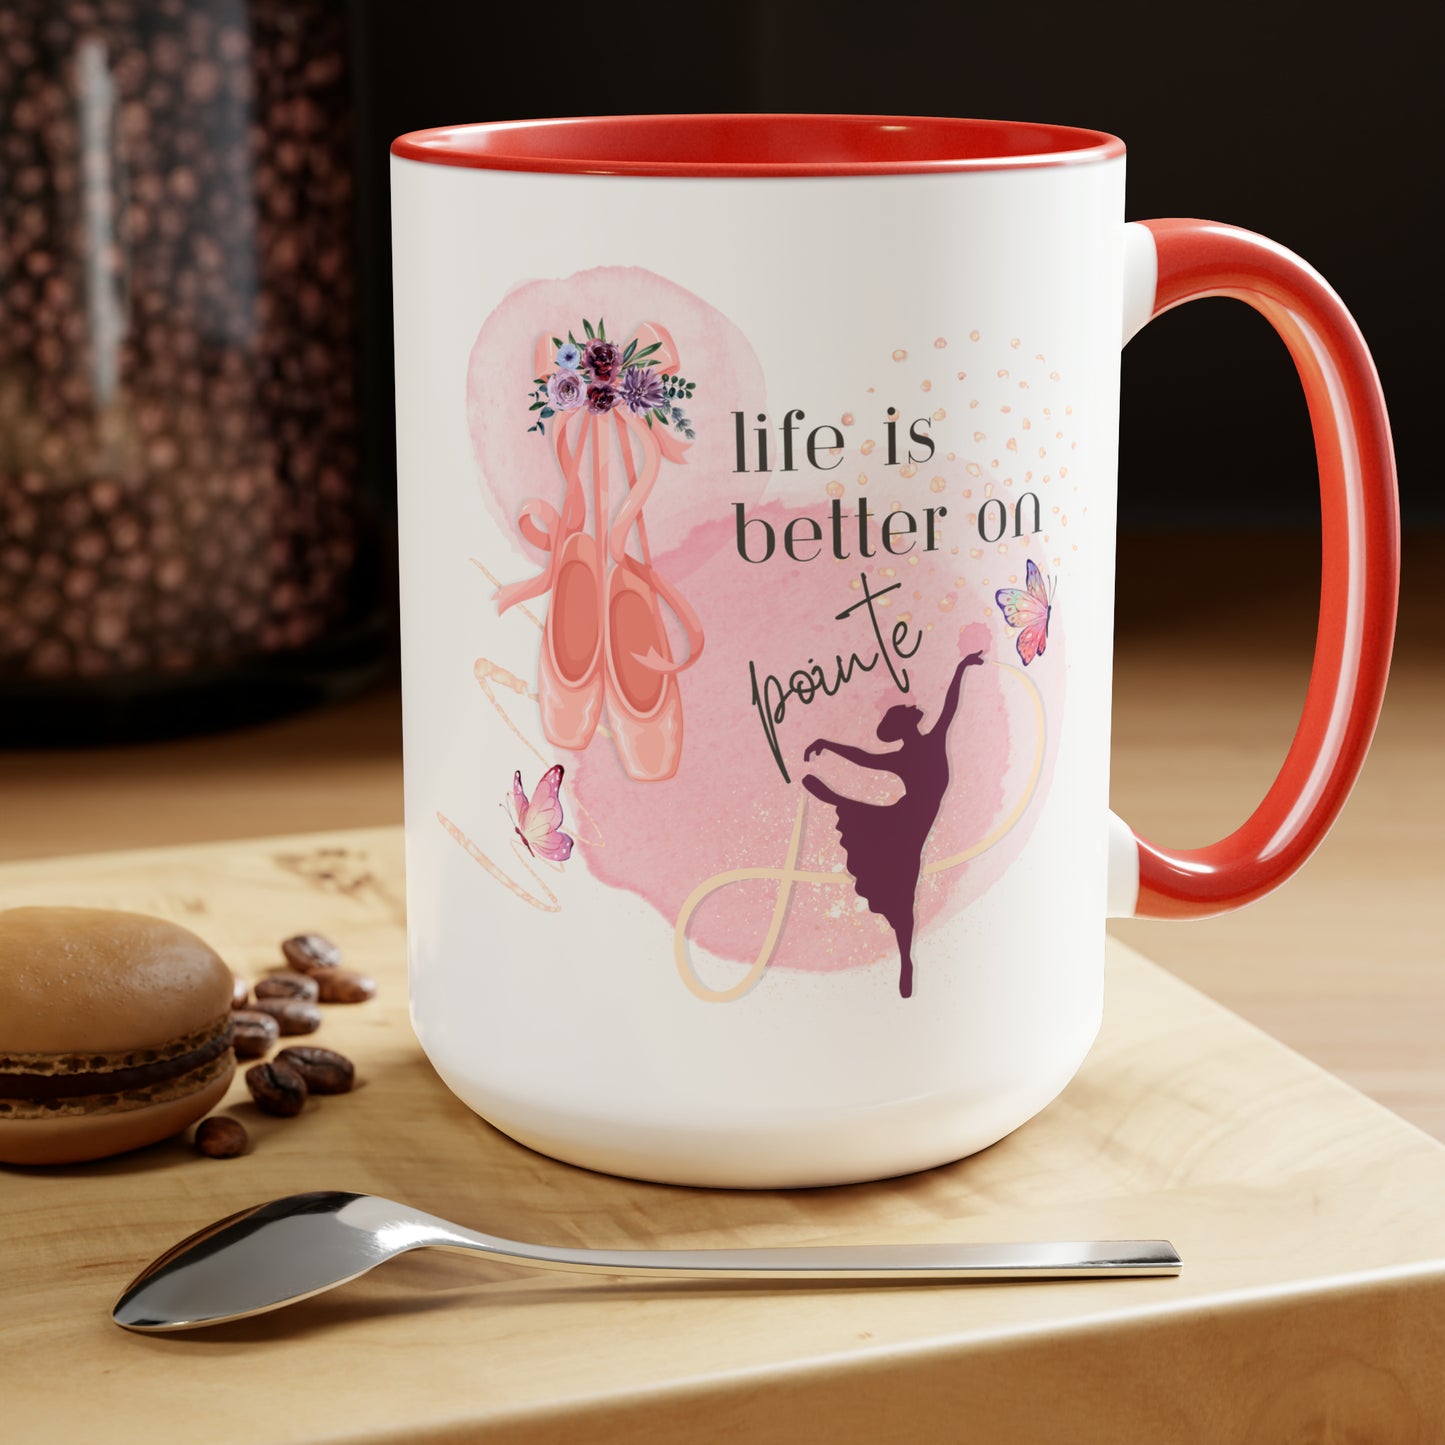 Two-Tone Coffee Mugs, 15oz - Ballerinas - Life is better on pointe